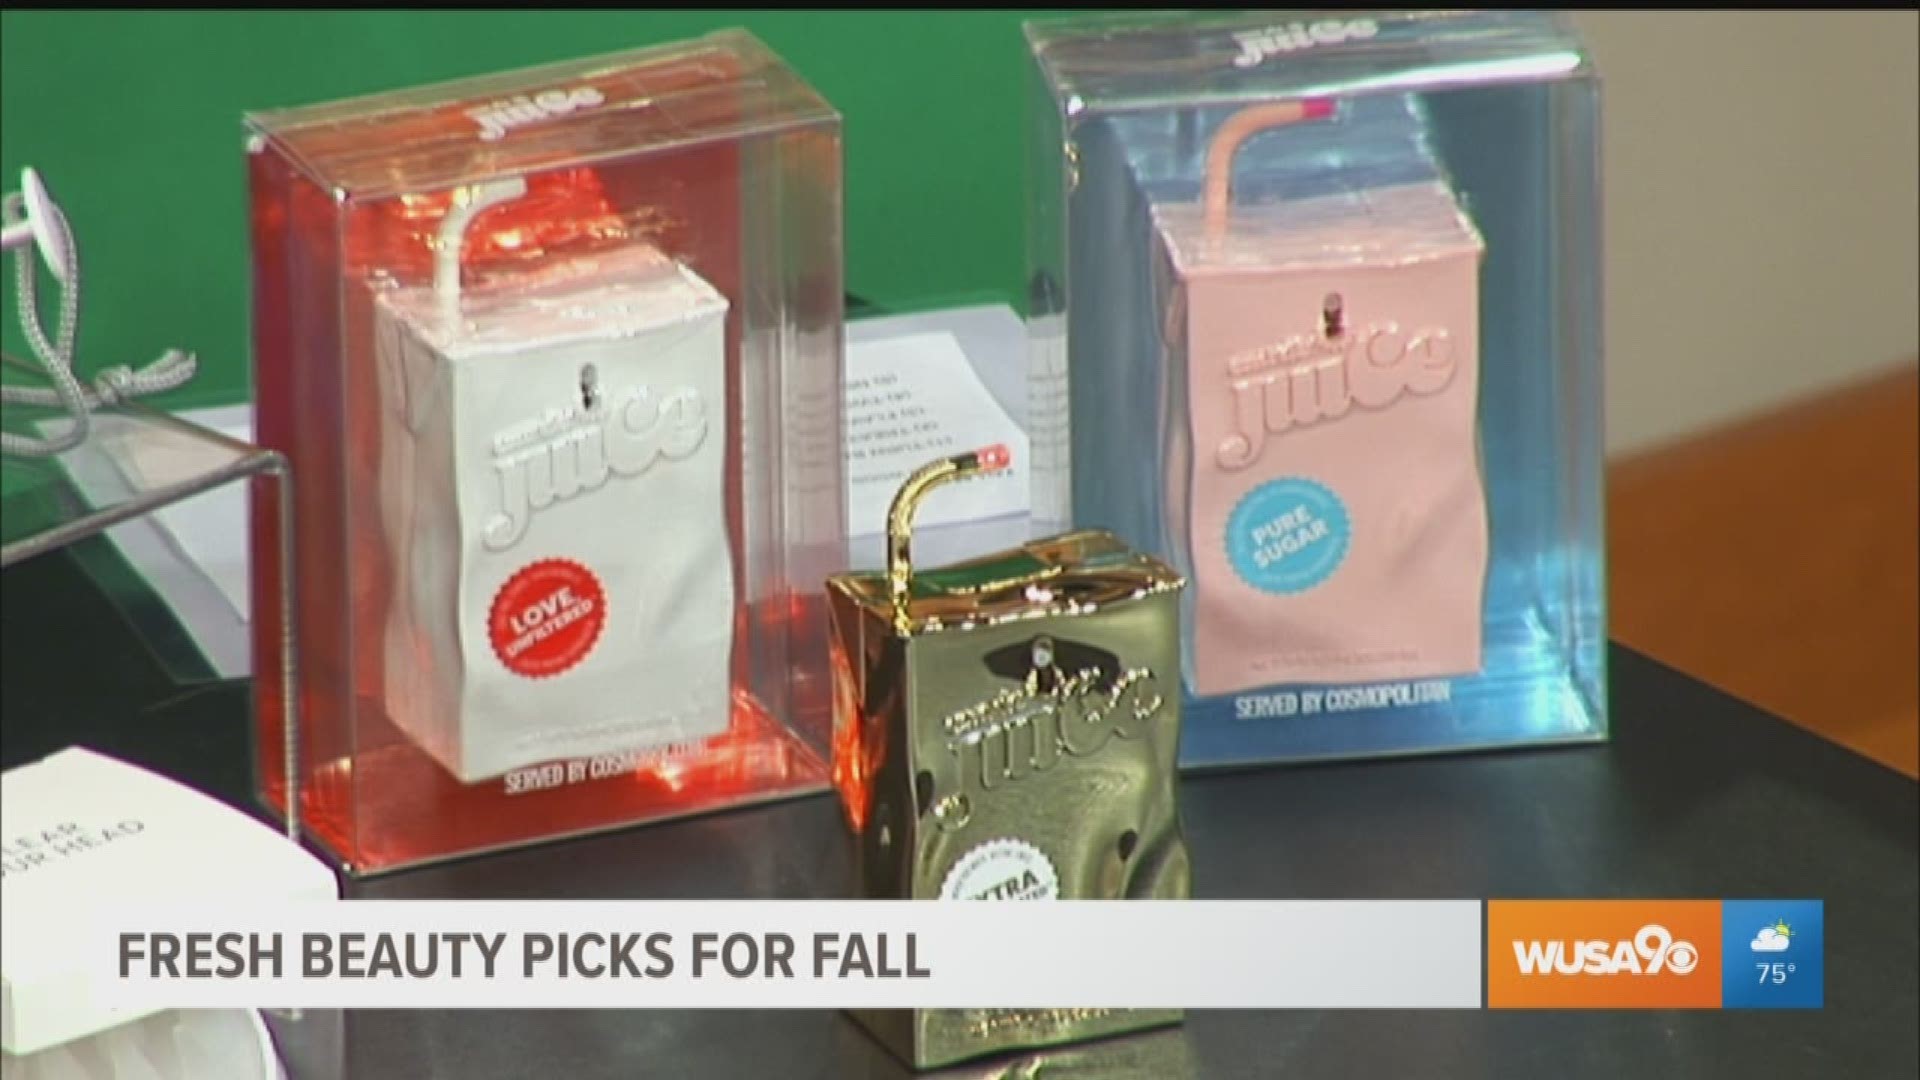 Today is the first day of fall, and your skincare routine might change. Lifestyle expert Mary Beth Wood is here tell you about the fall beauty products you'll need.